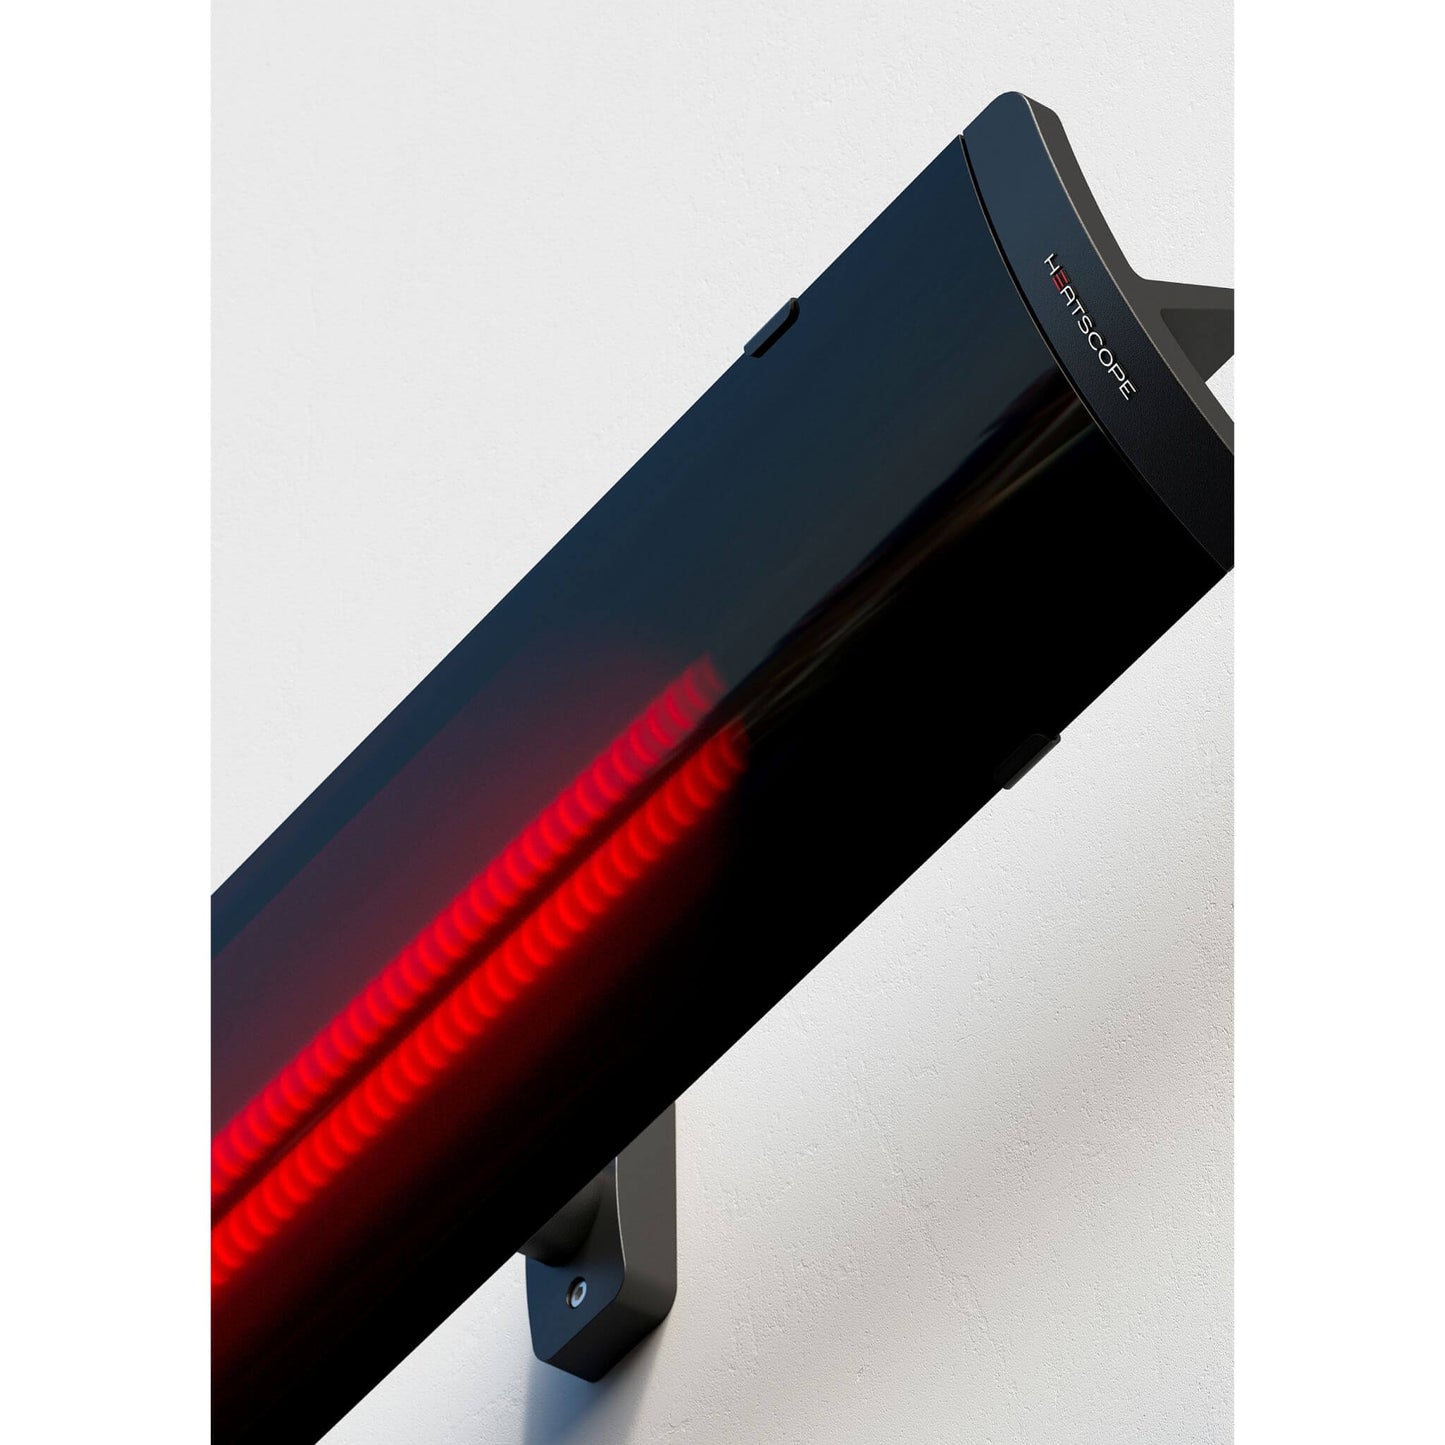 Heatscope Pure radiant heater in black - close up of infrared panels with wall mounted parts